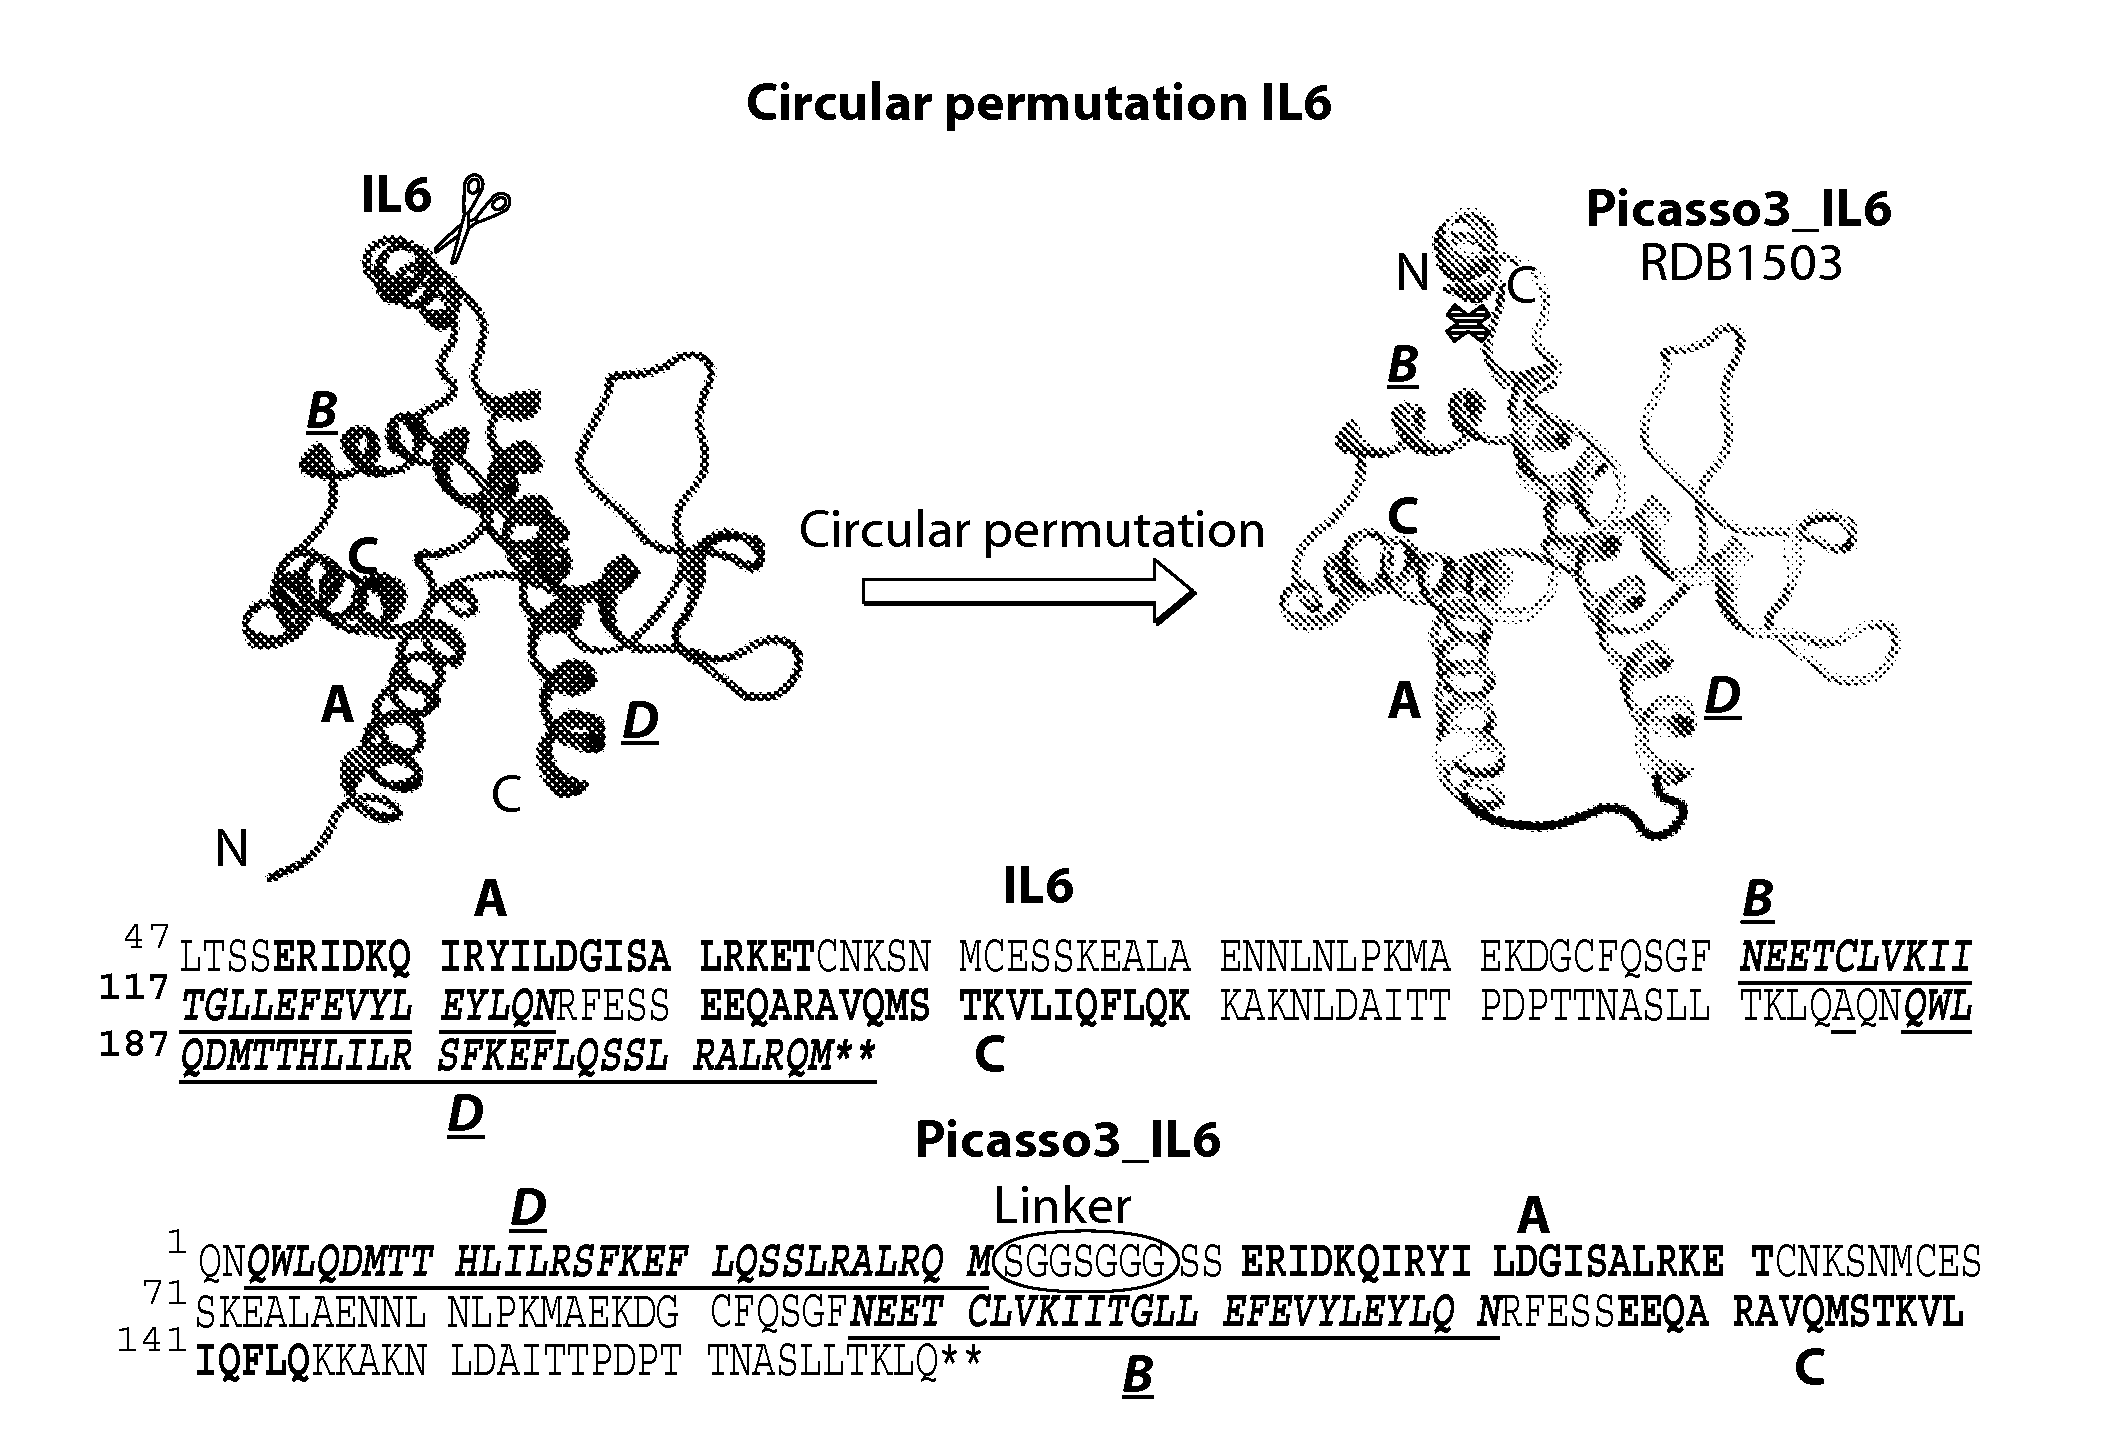 Ligands Modified by Circular Permutation as Agonists and Antagonists